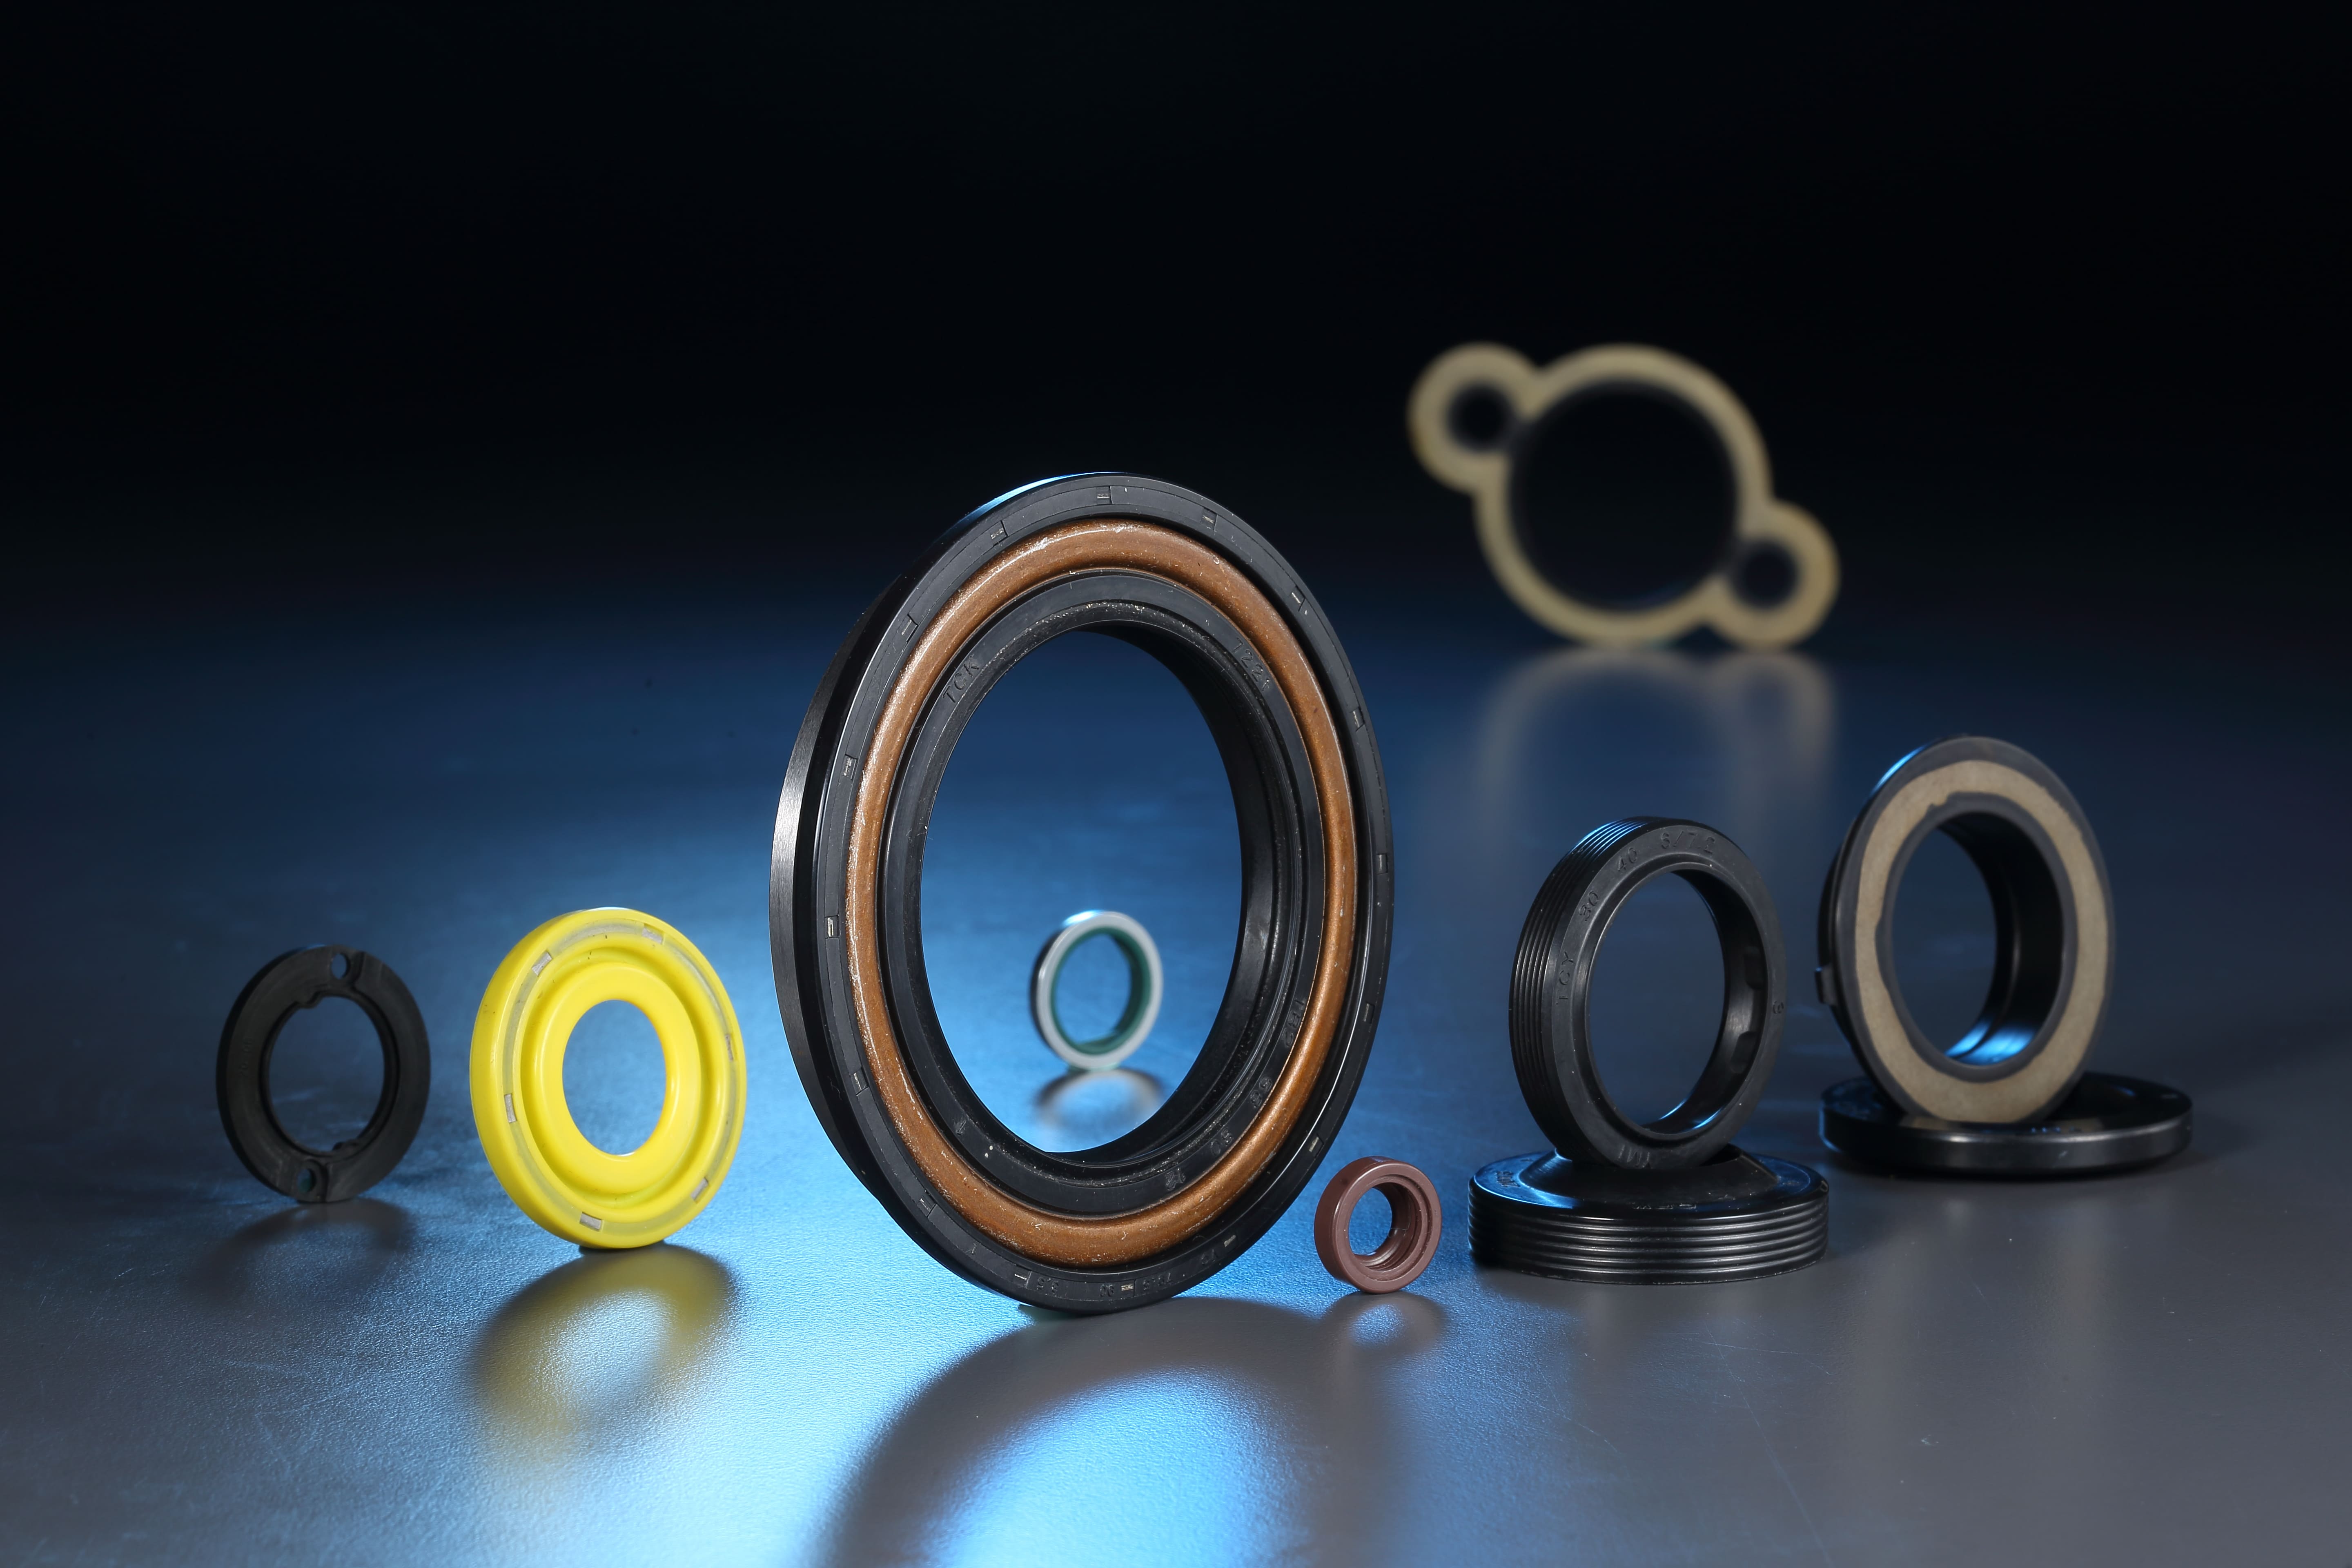 Automobile Oil Seal for Rubber, Plastic Parts made by Yee Ming Ying Co., LTD.　昱銘穎有限公司 - MatchSupplier.com